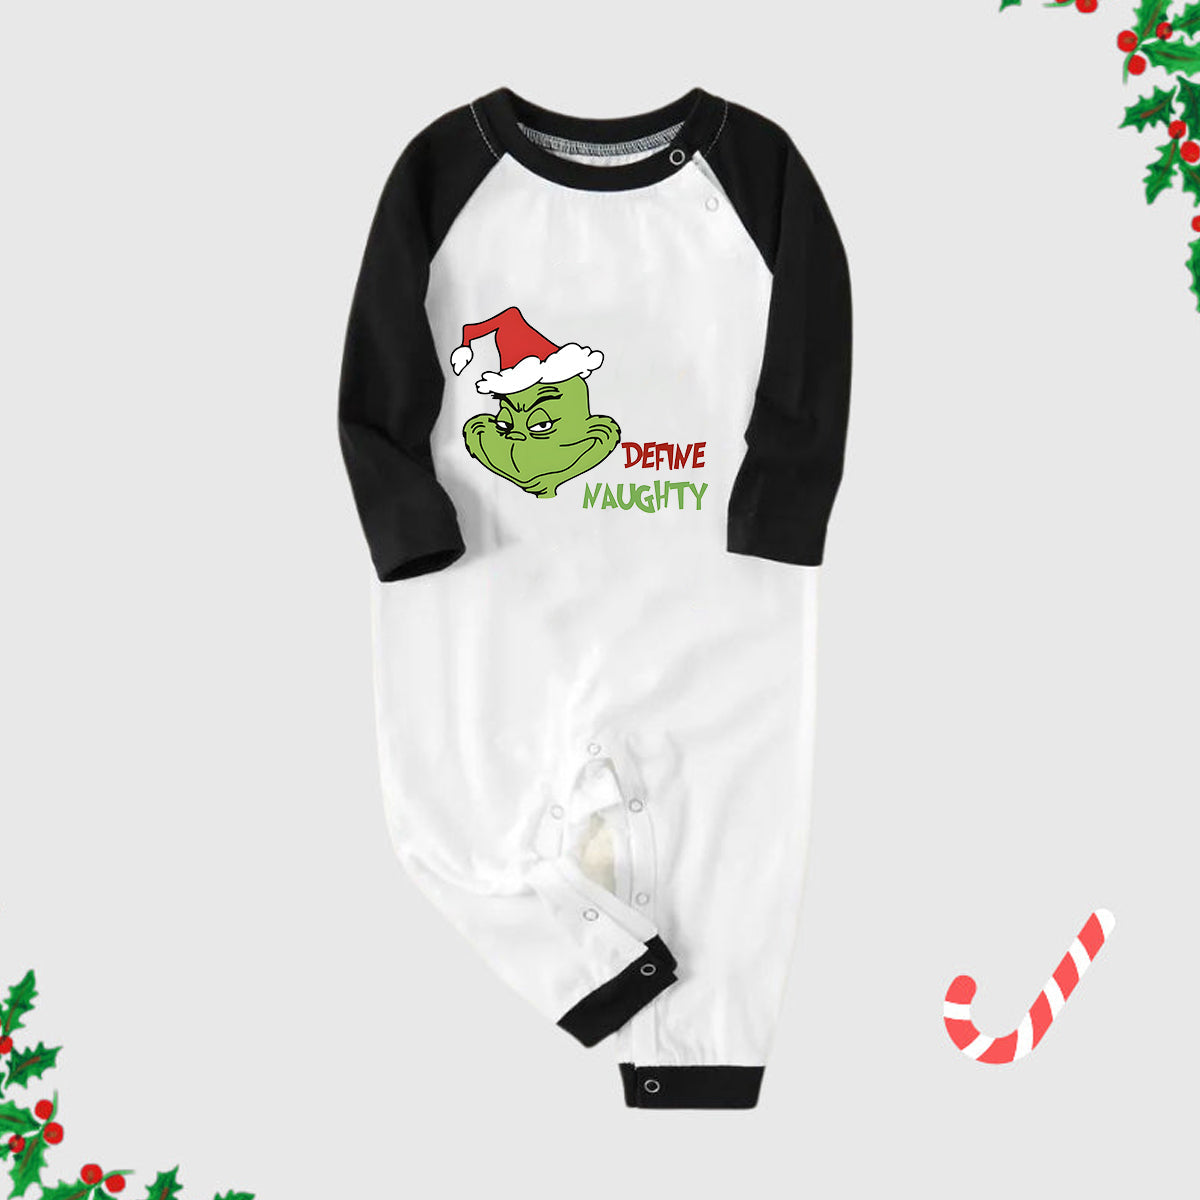 Christmas 'Define Naughty' Letter Print Patterned Casual Long Sleeve Sweatshirts Black Contrast Top and Black and Green Plaid Pants Family Matching Pajamas Sets With Dog Bandana